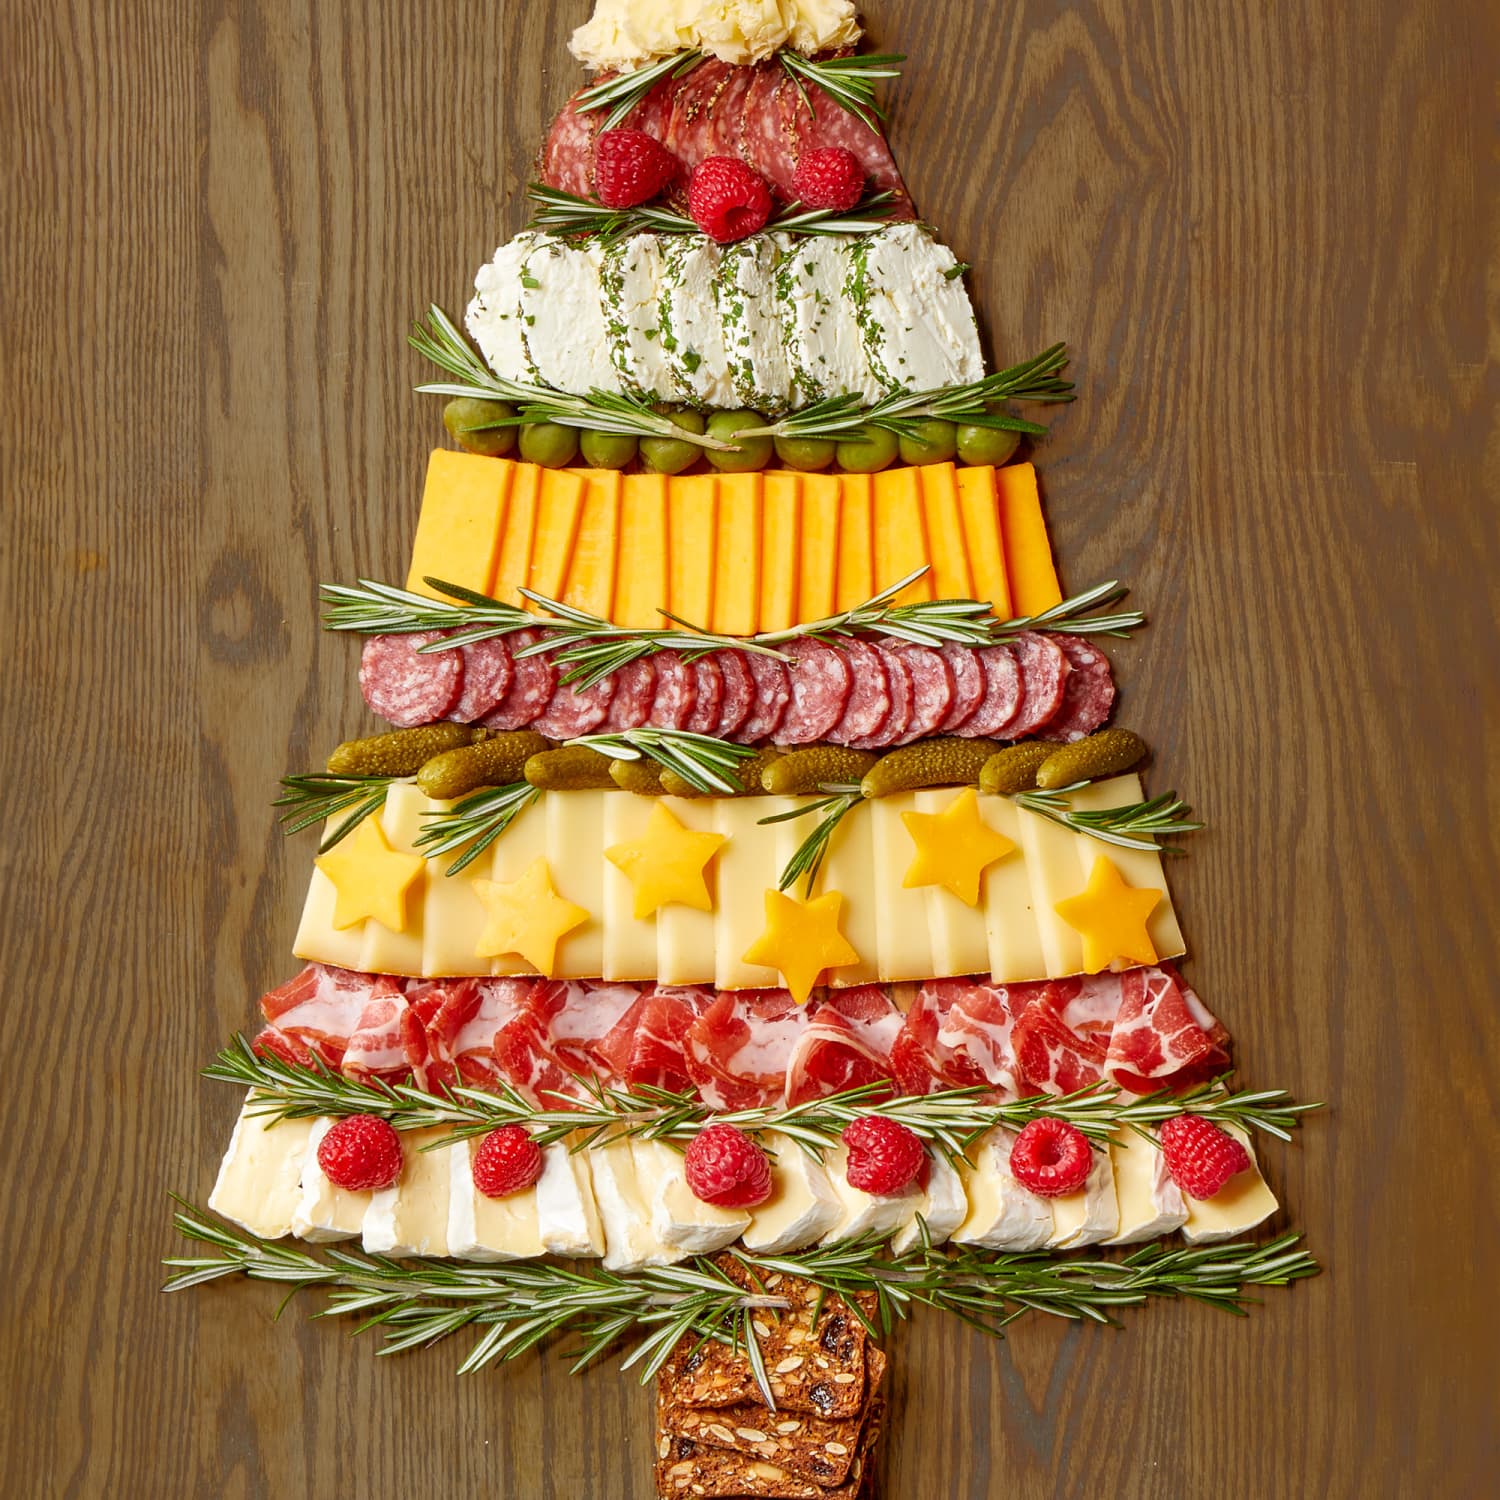 Charcuterie Board Ideas: 15 Ways to Make Your Board Stand Out